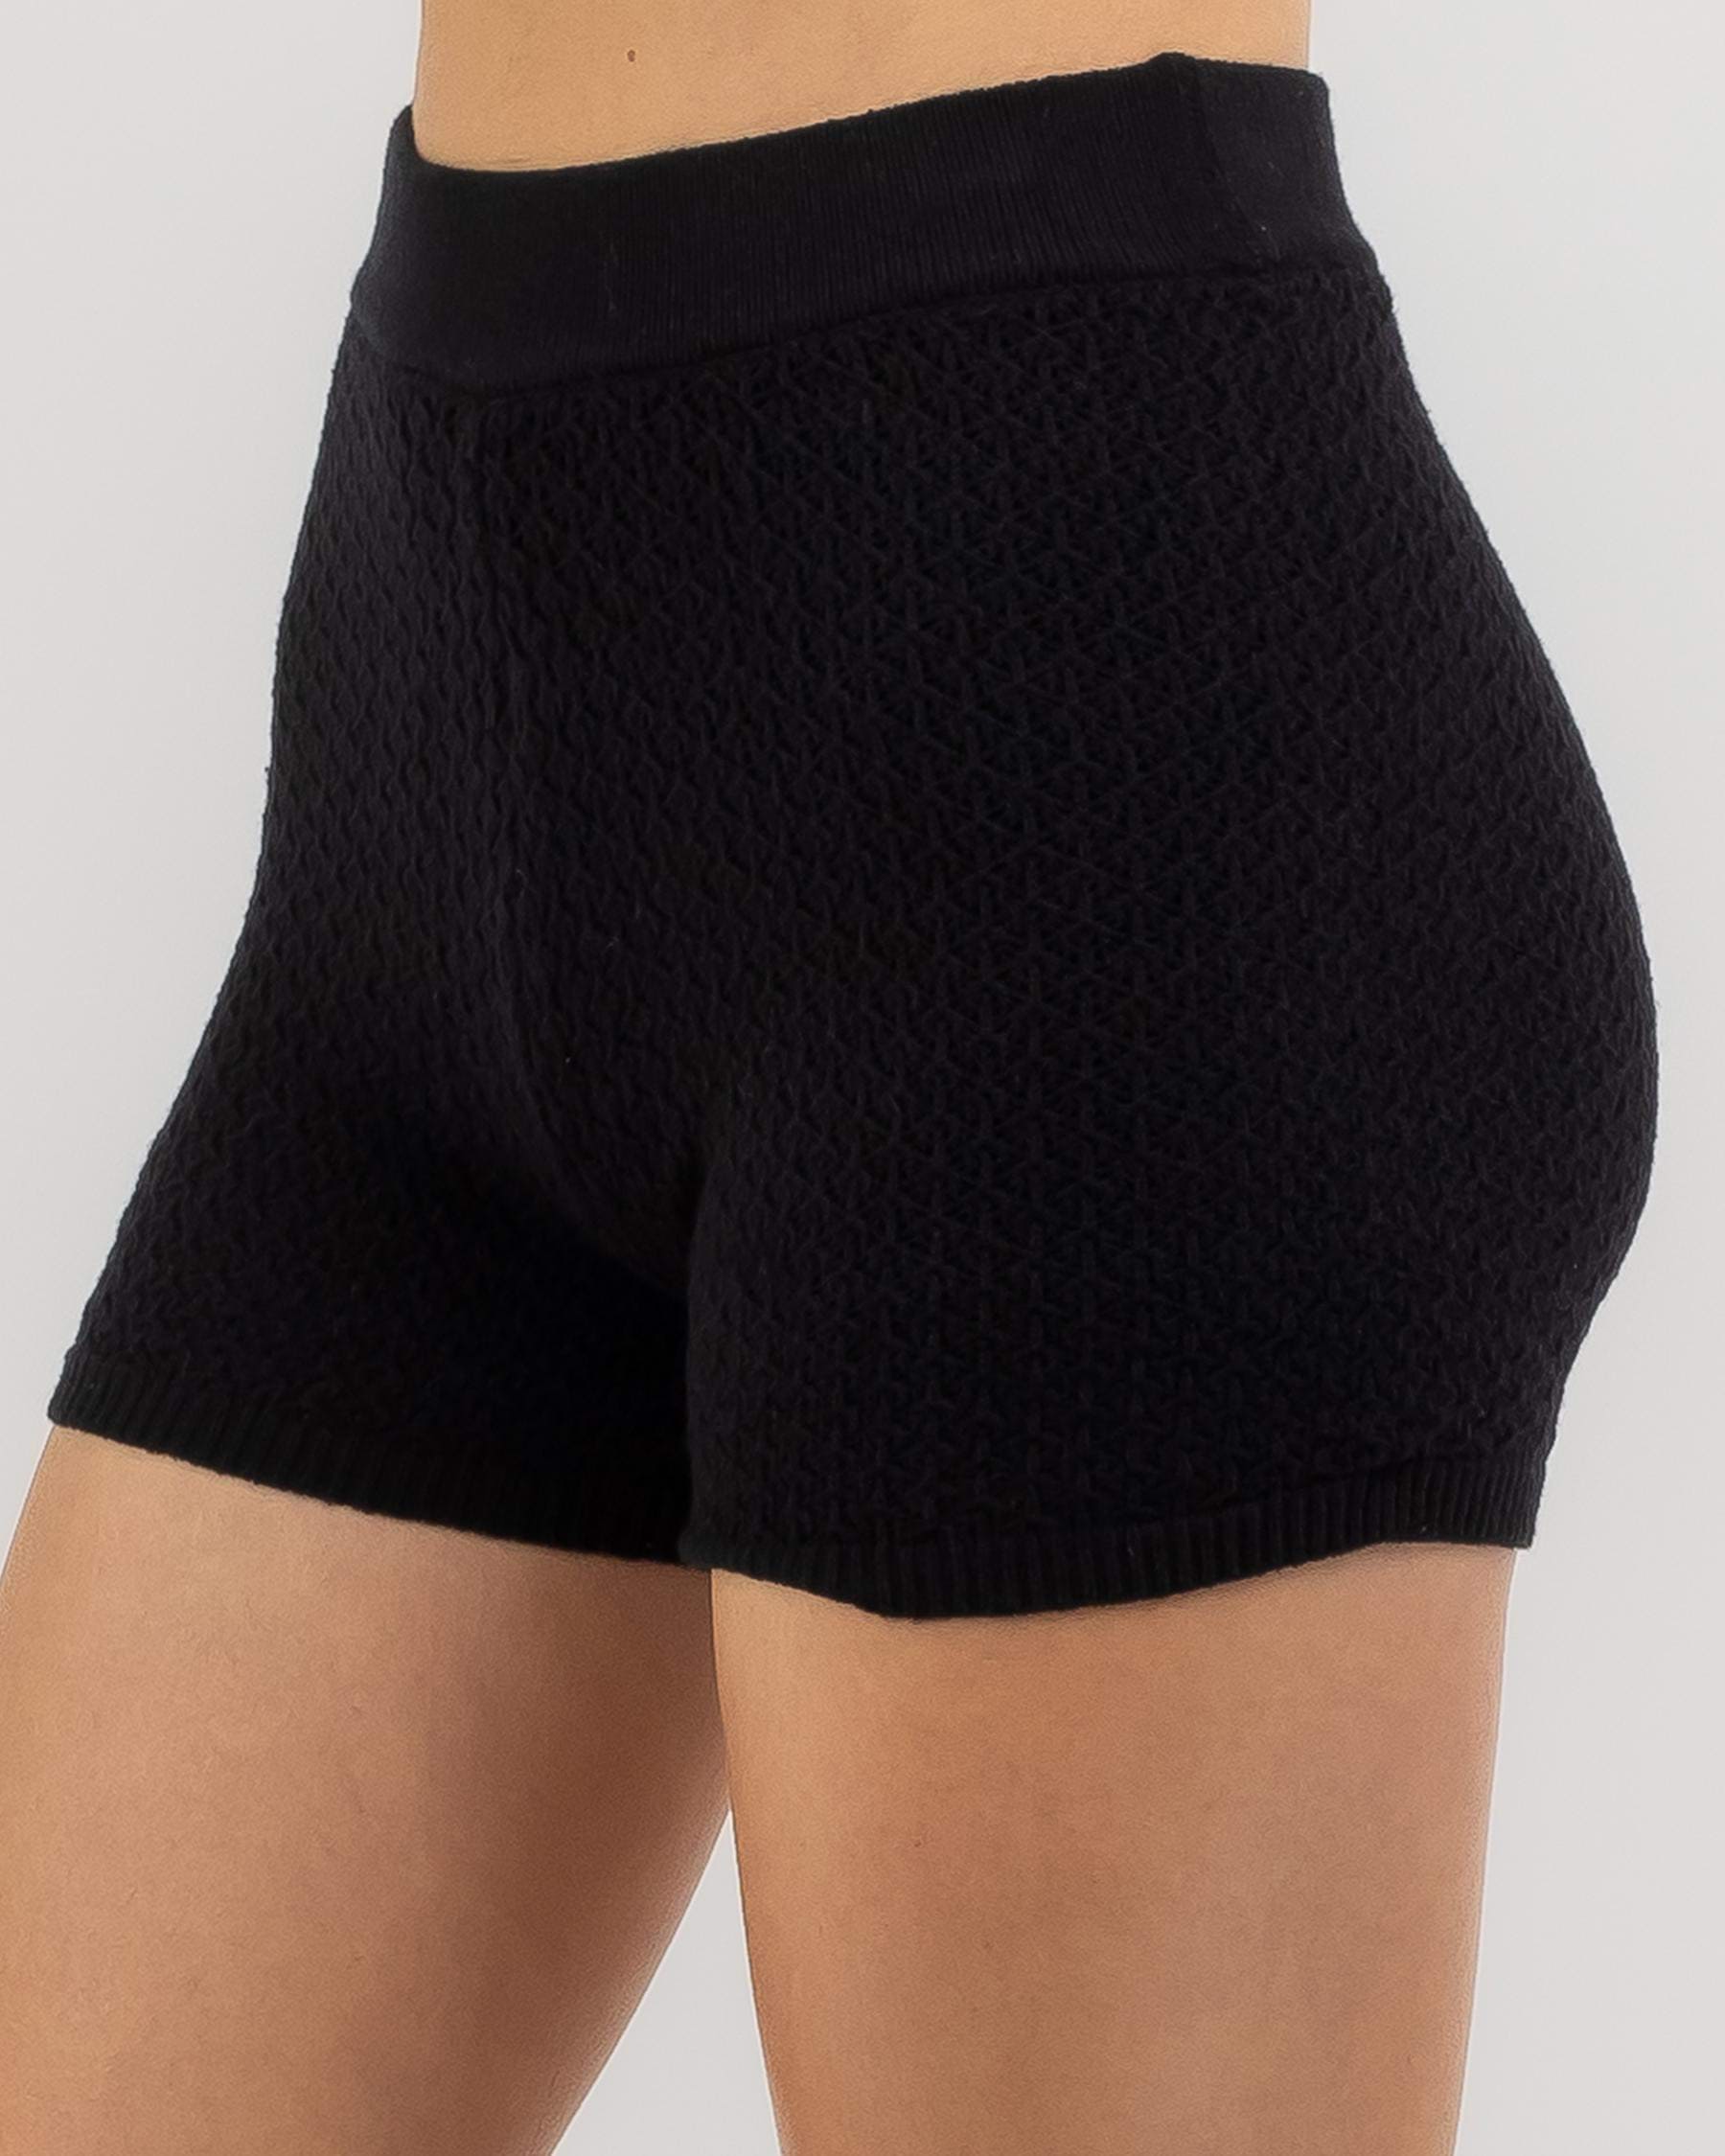 Ava And Ever Kensington Bike Shorts In Black - Fast Shipping & Easy ...